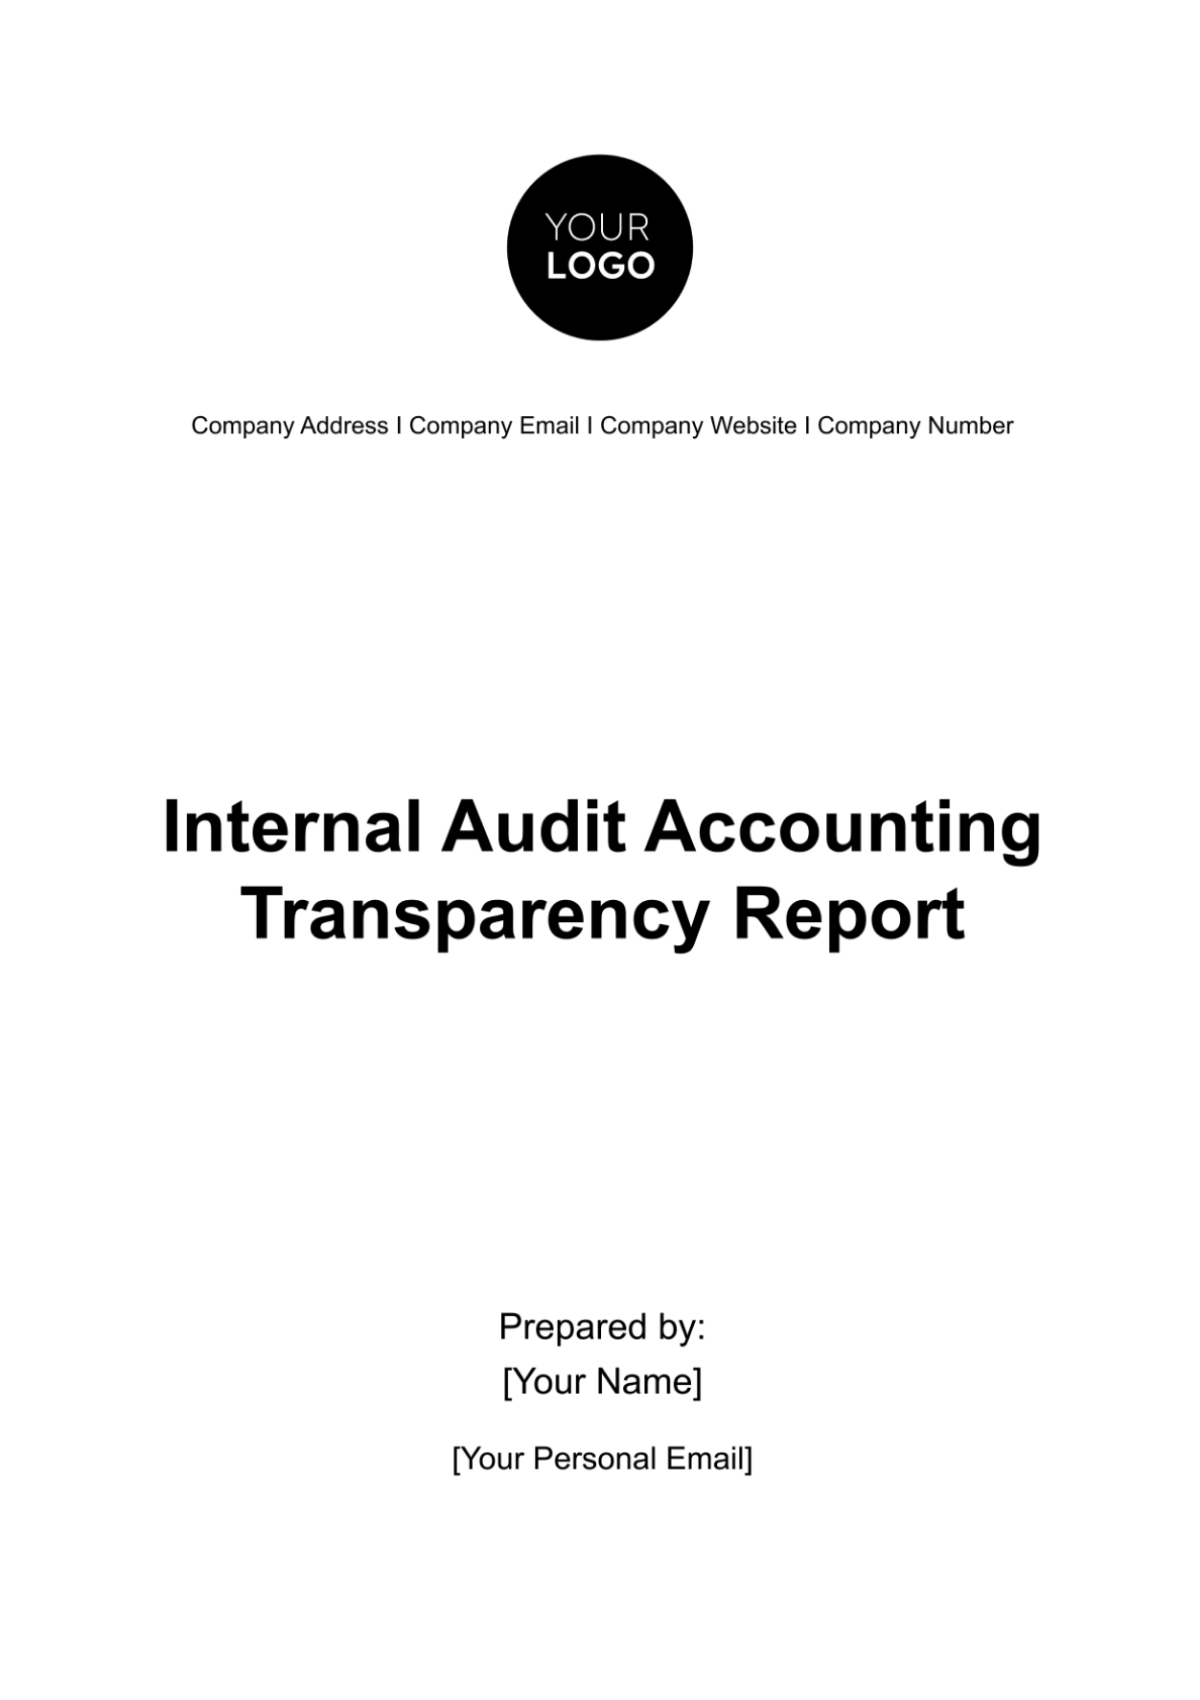 Internal Audit Accounting Transparency Report Template